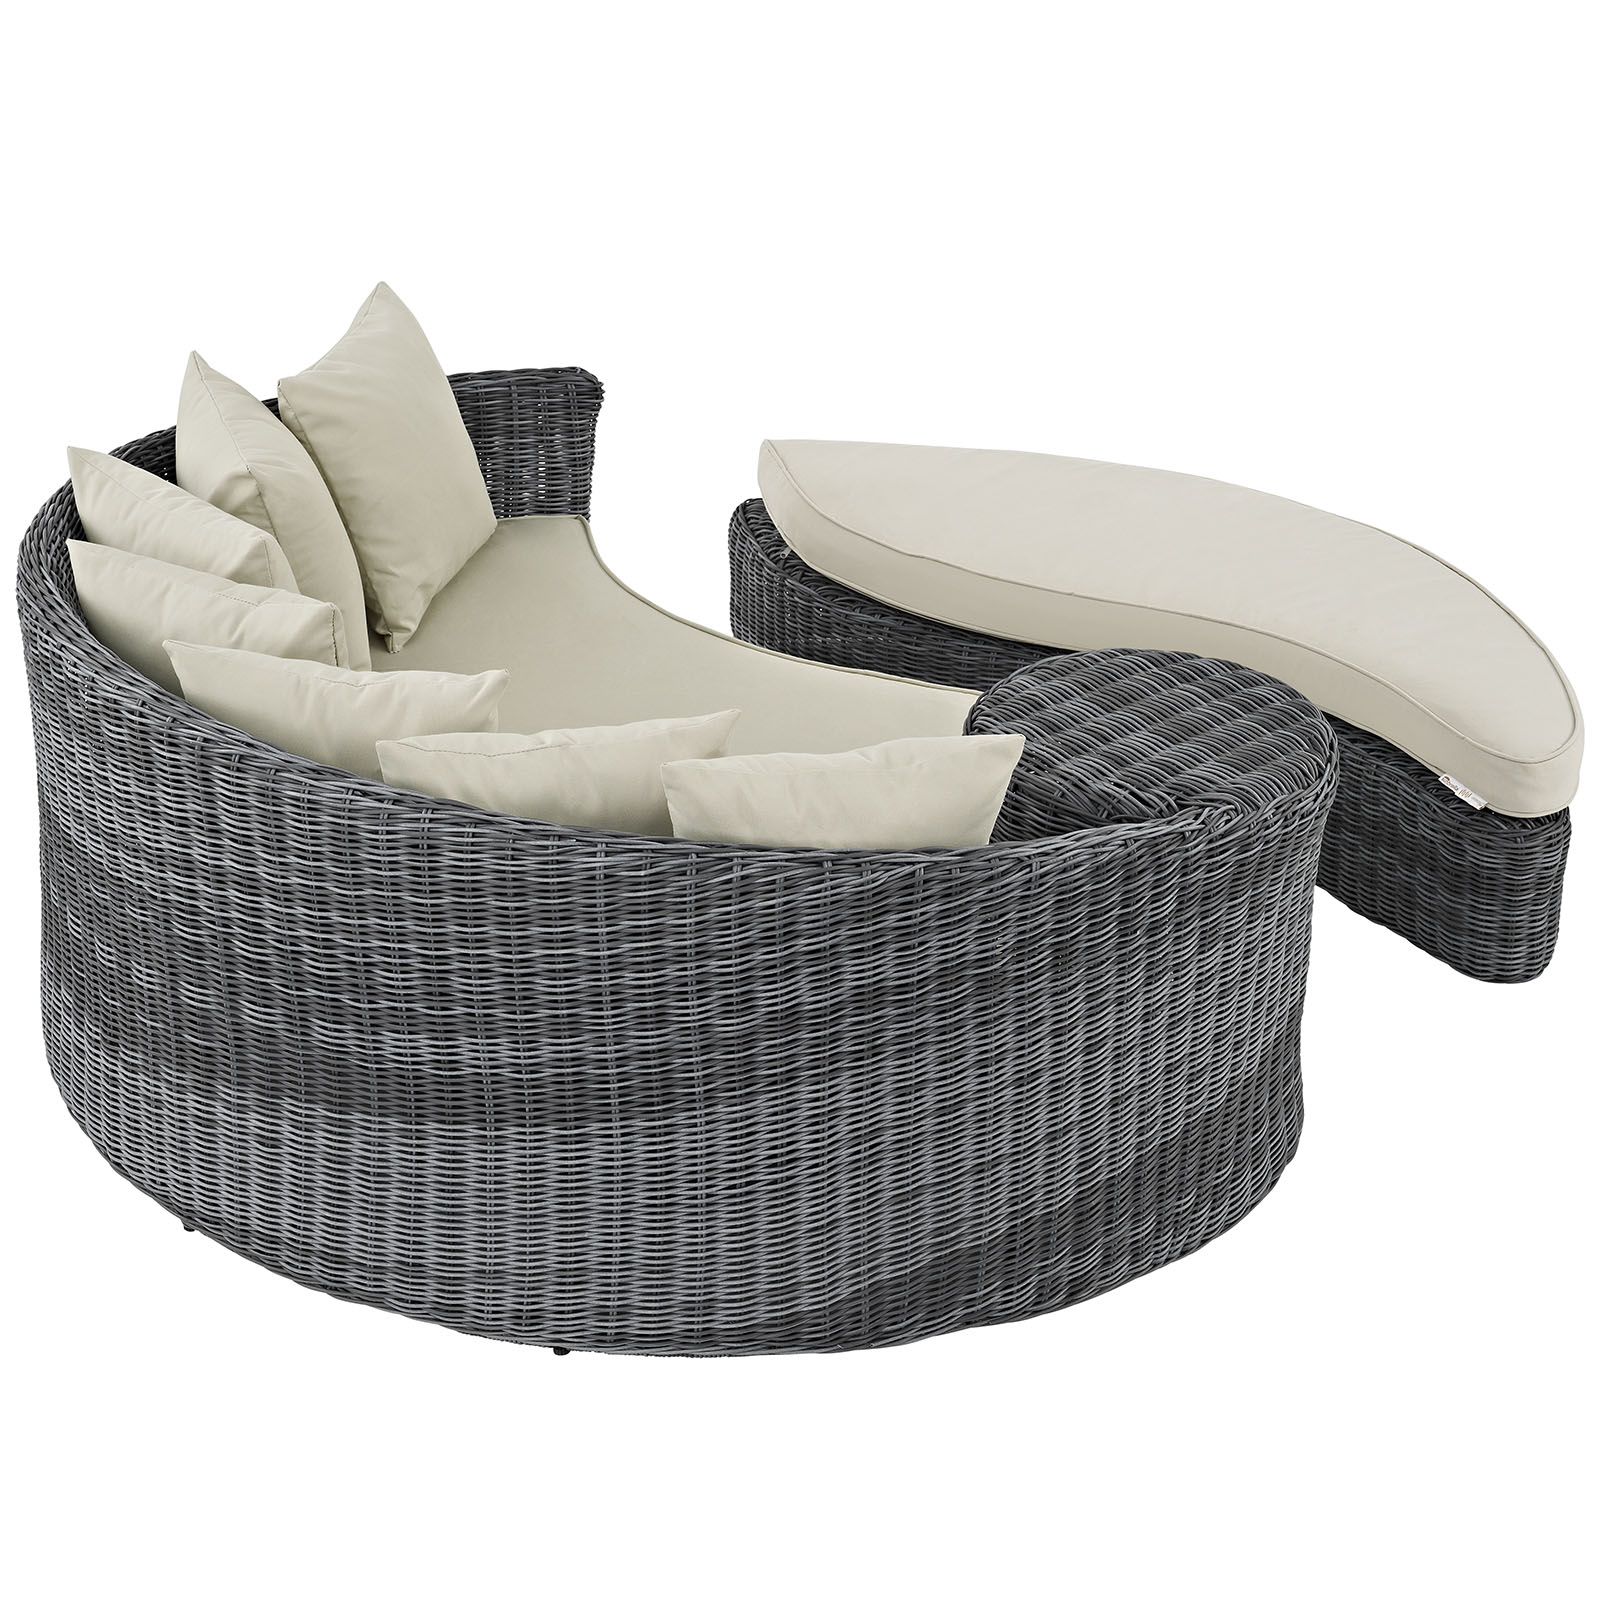 Modern Contemporary Urban Design Outdoor Patio Balcony Daybed Sofa, Beige, Rattan - image 4 of 4